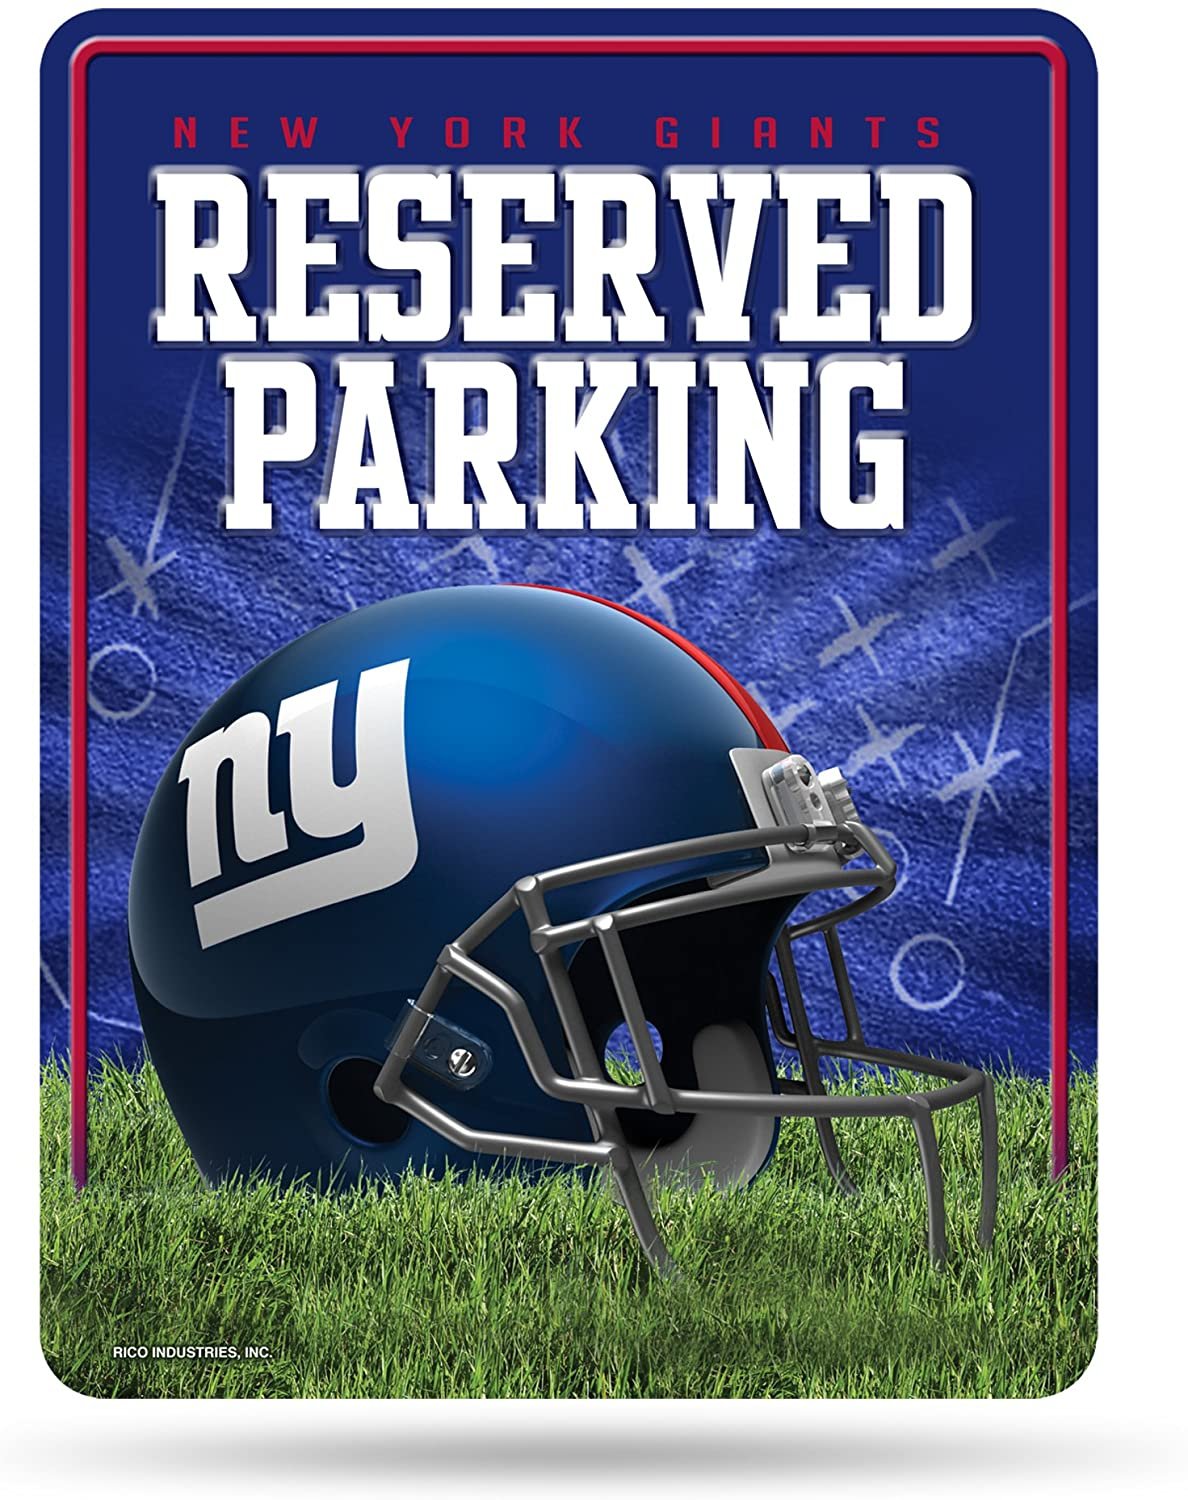 New York Giants 8-Inch by 11-Inch Metal Parking Sign Décor